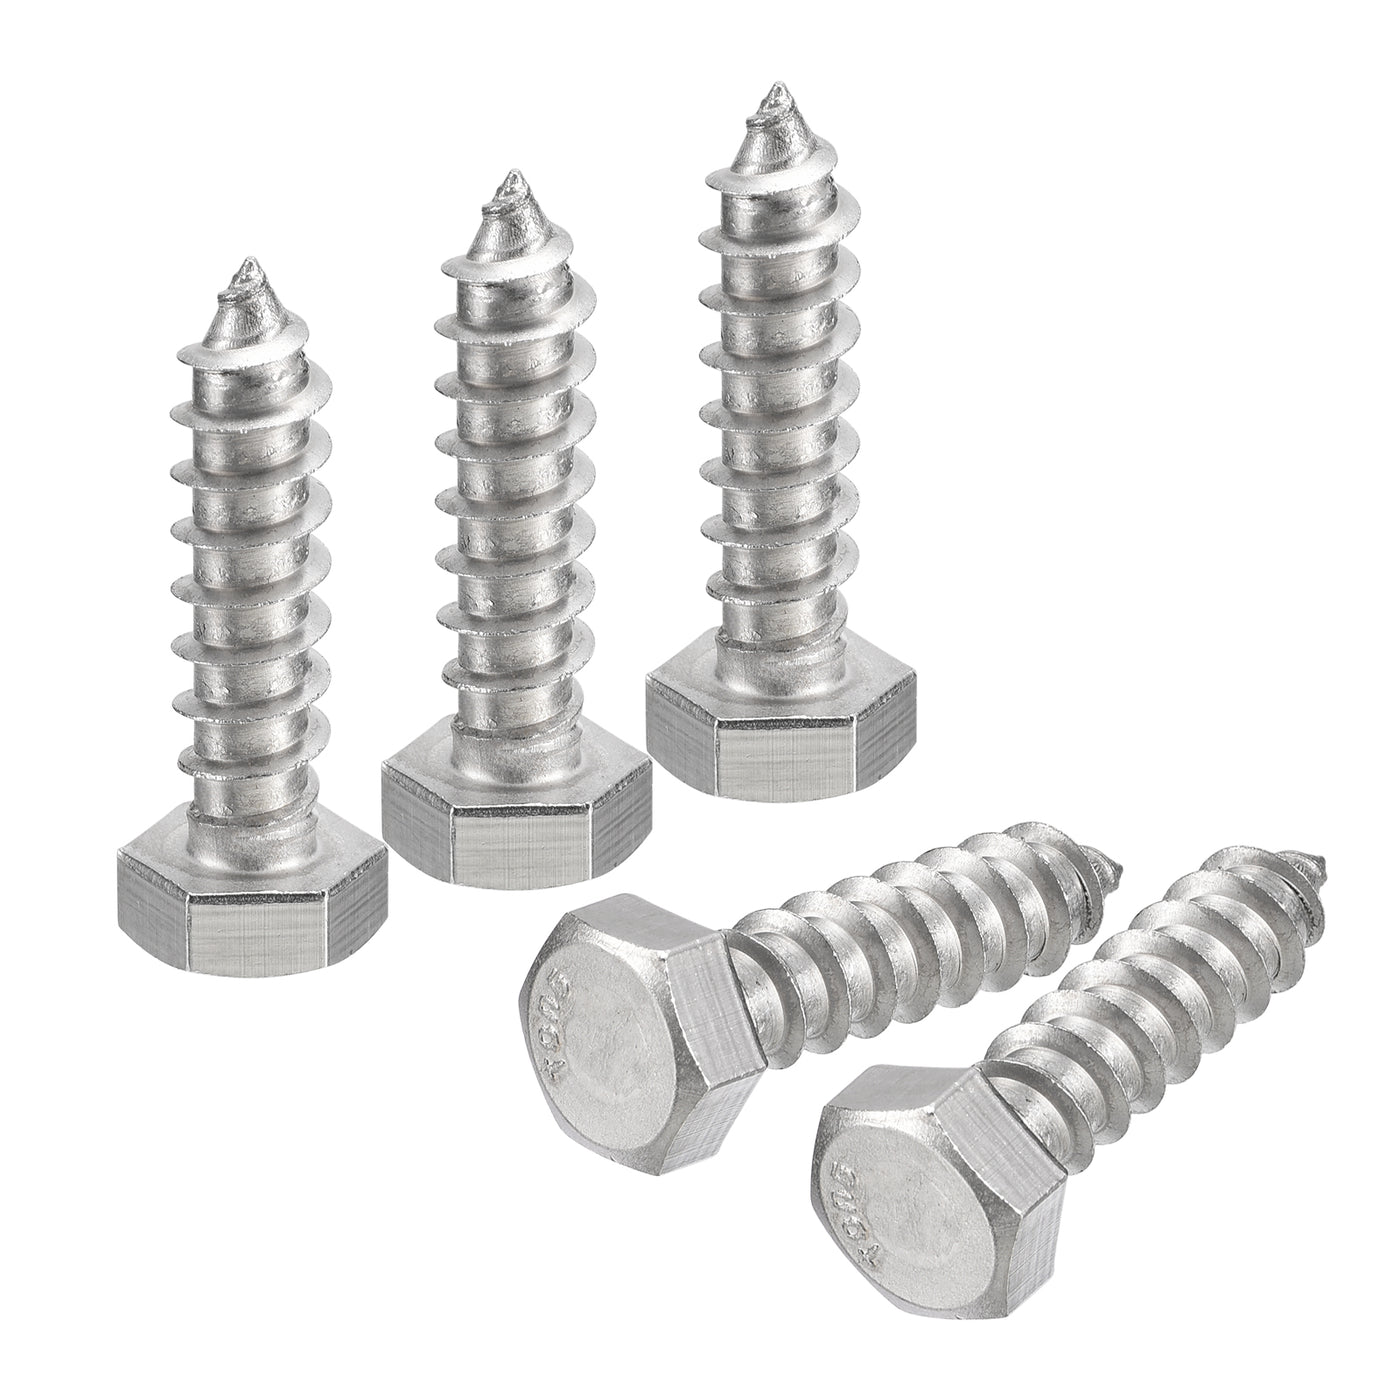 uxcell Uxcell Hex Head Lag Screws Bolts, 10pcs 3/8" x 1-1/2" 304 Stainless Steel Wood Screws